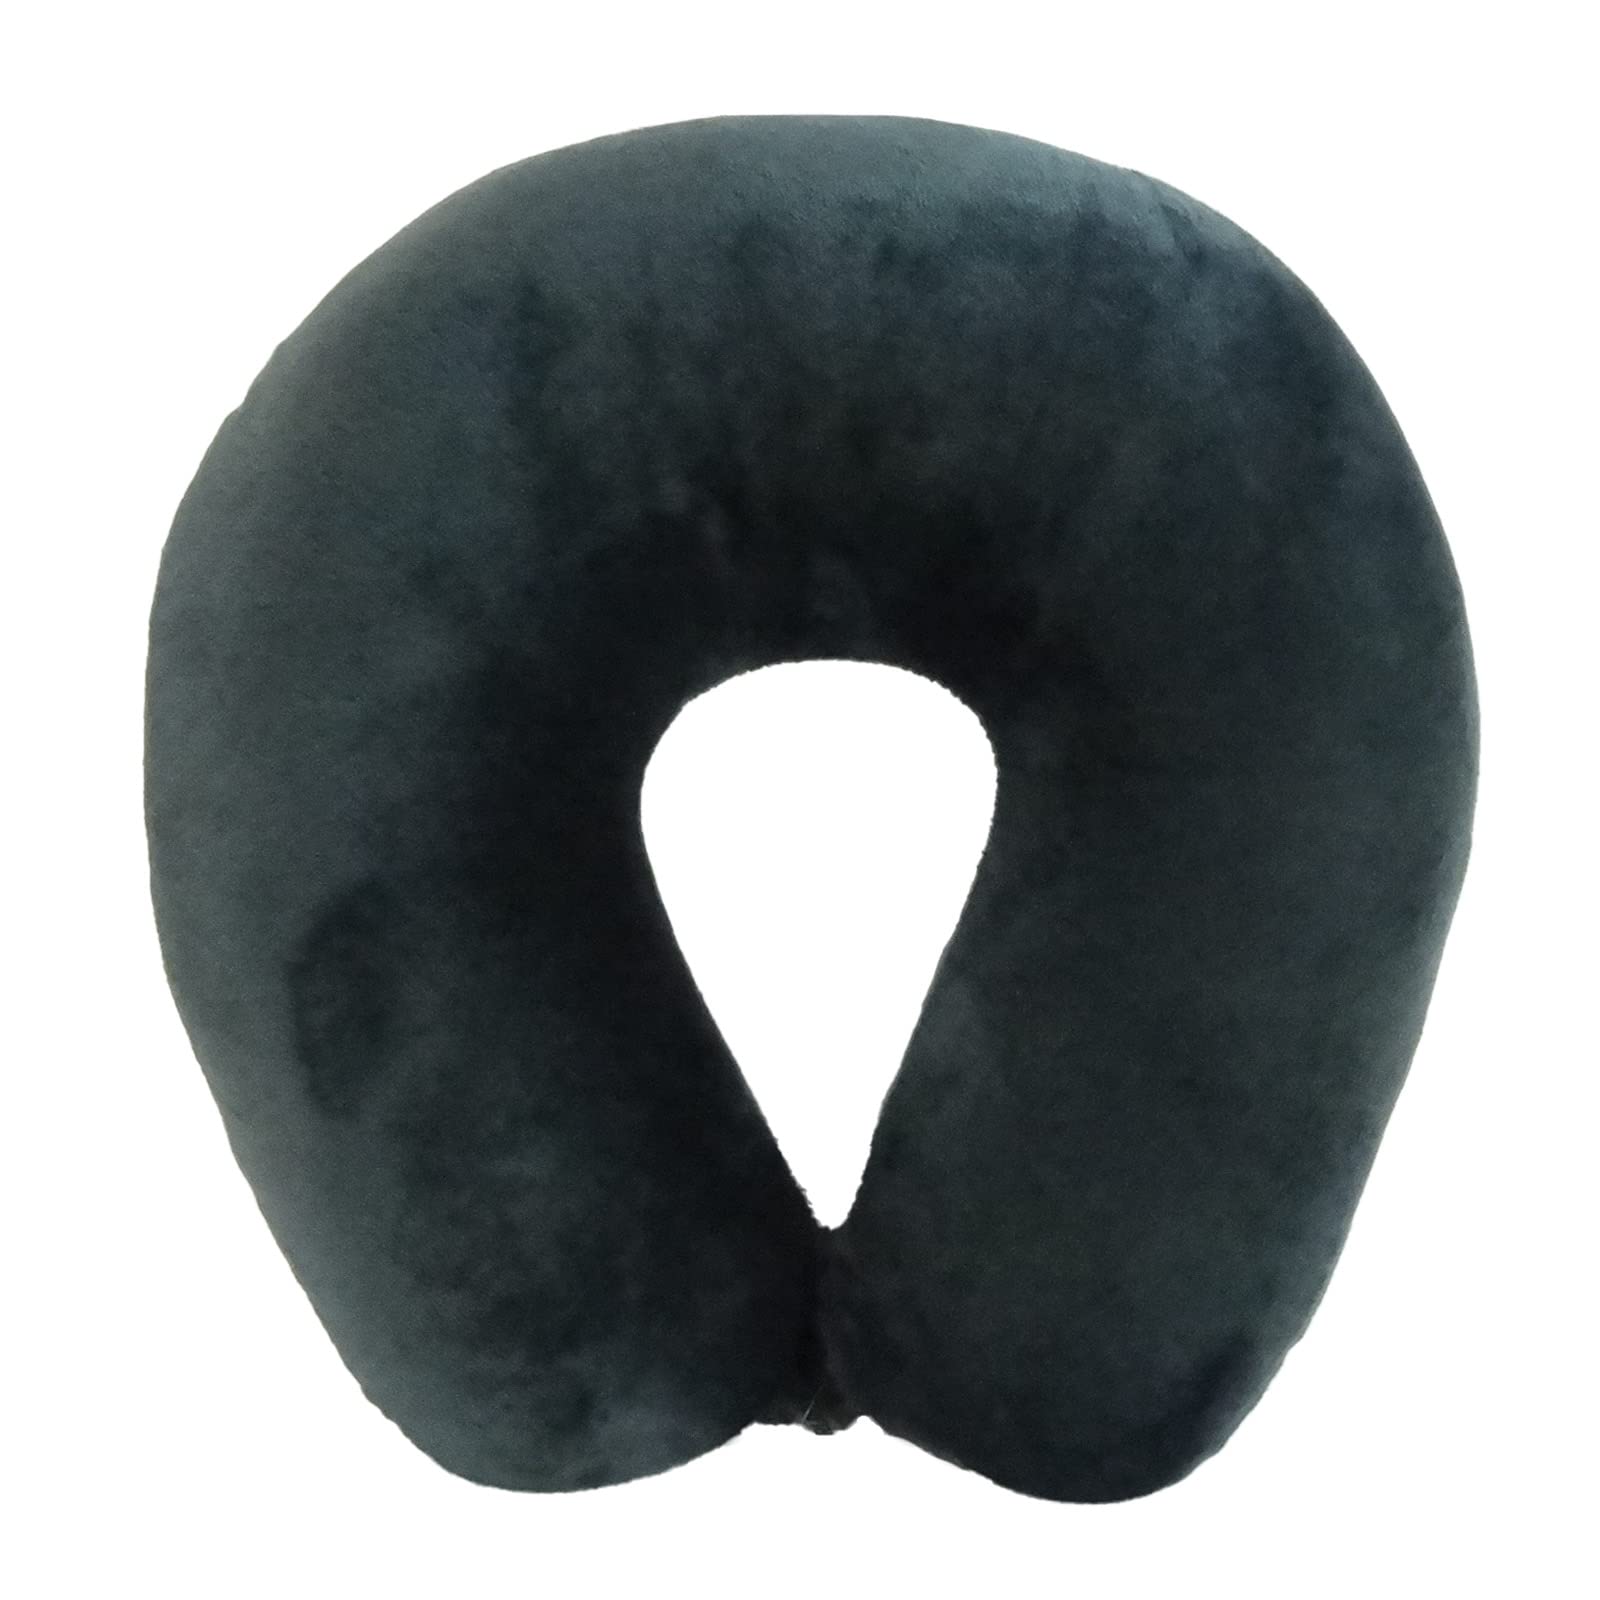 Wolf Essentials Adult Cozy Soft Microfiber Neck Pillow, Compact, Perfect for Plane or Car Travel, Charcoal